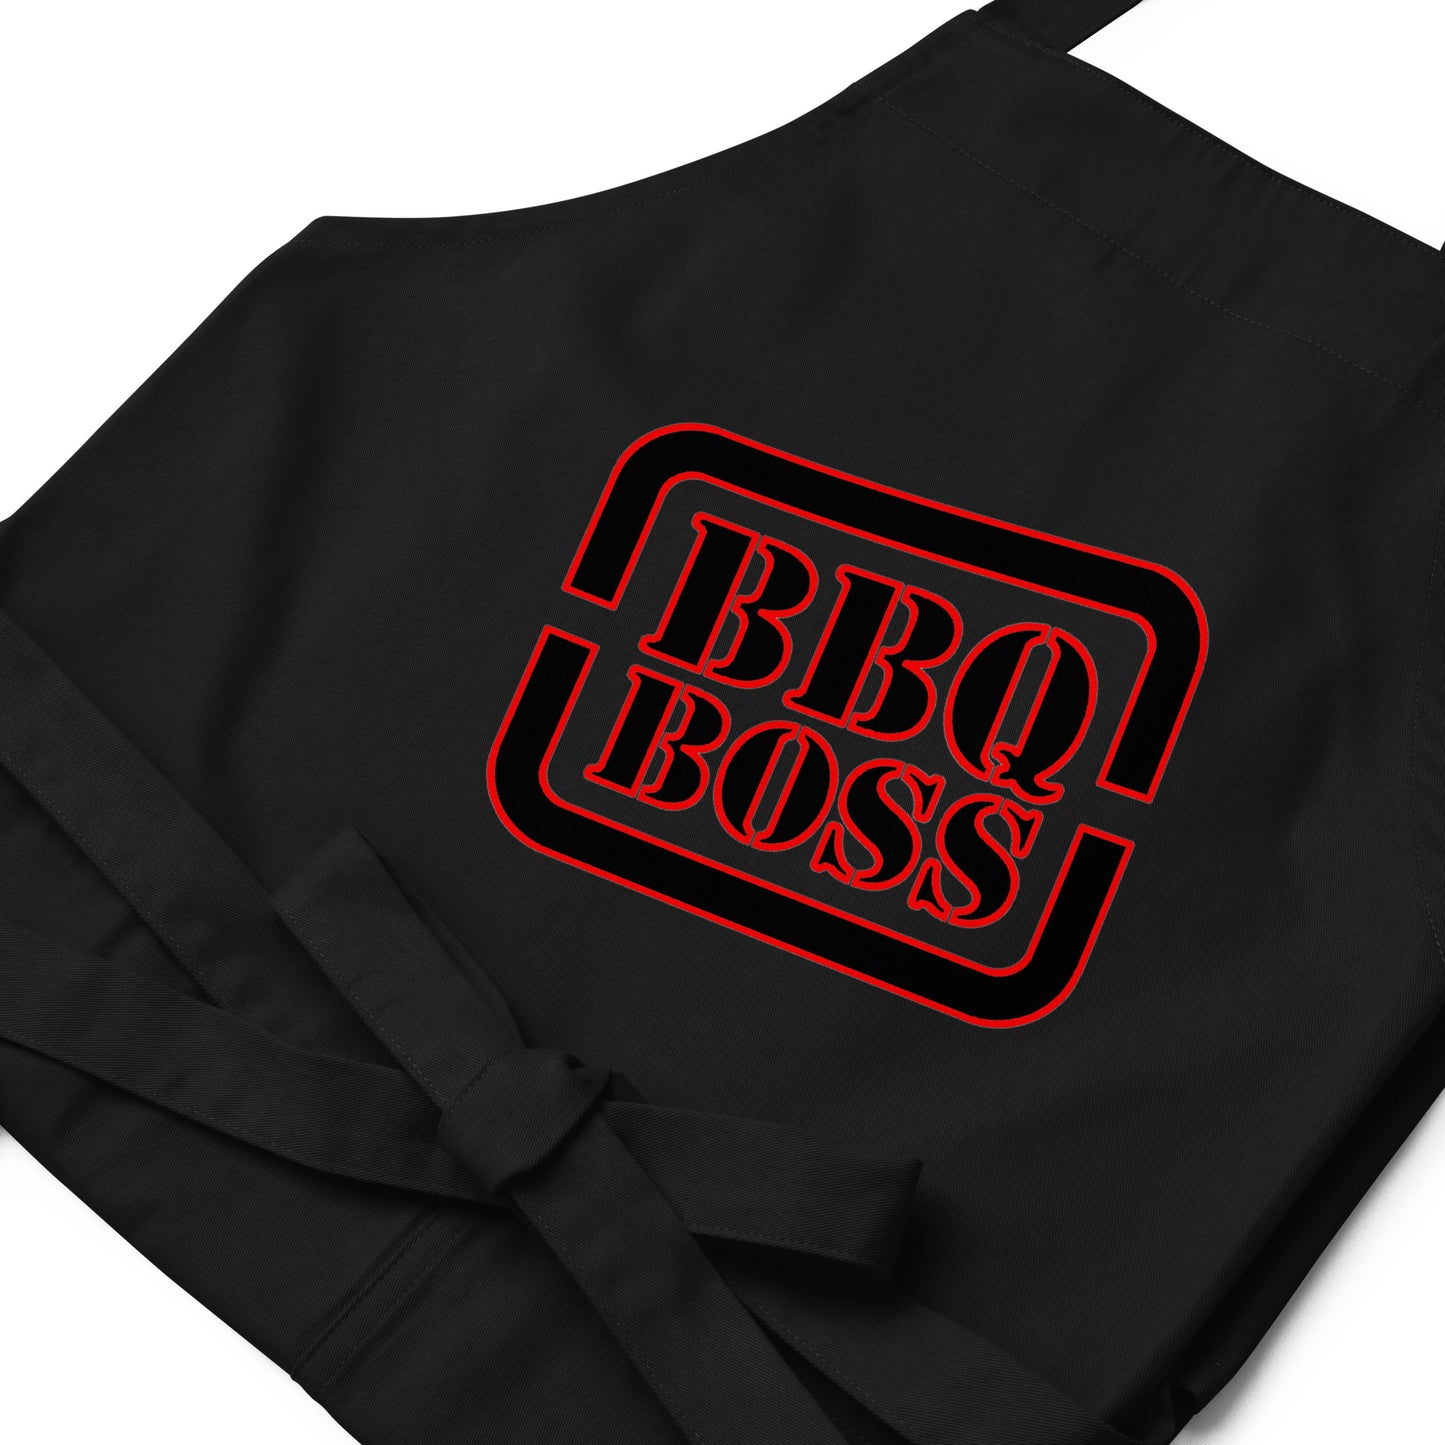 black apron with text "BBQ BOSS"